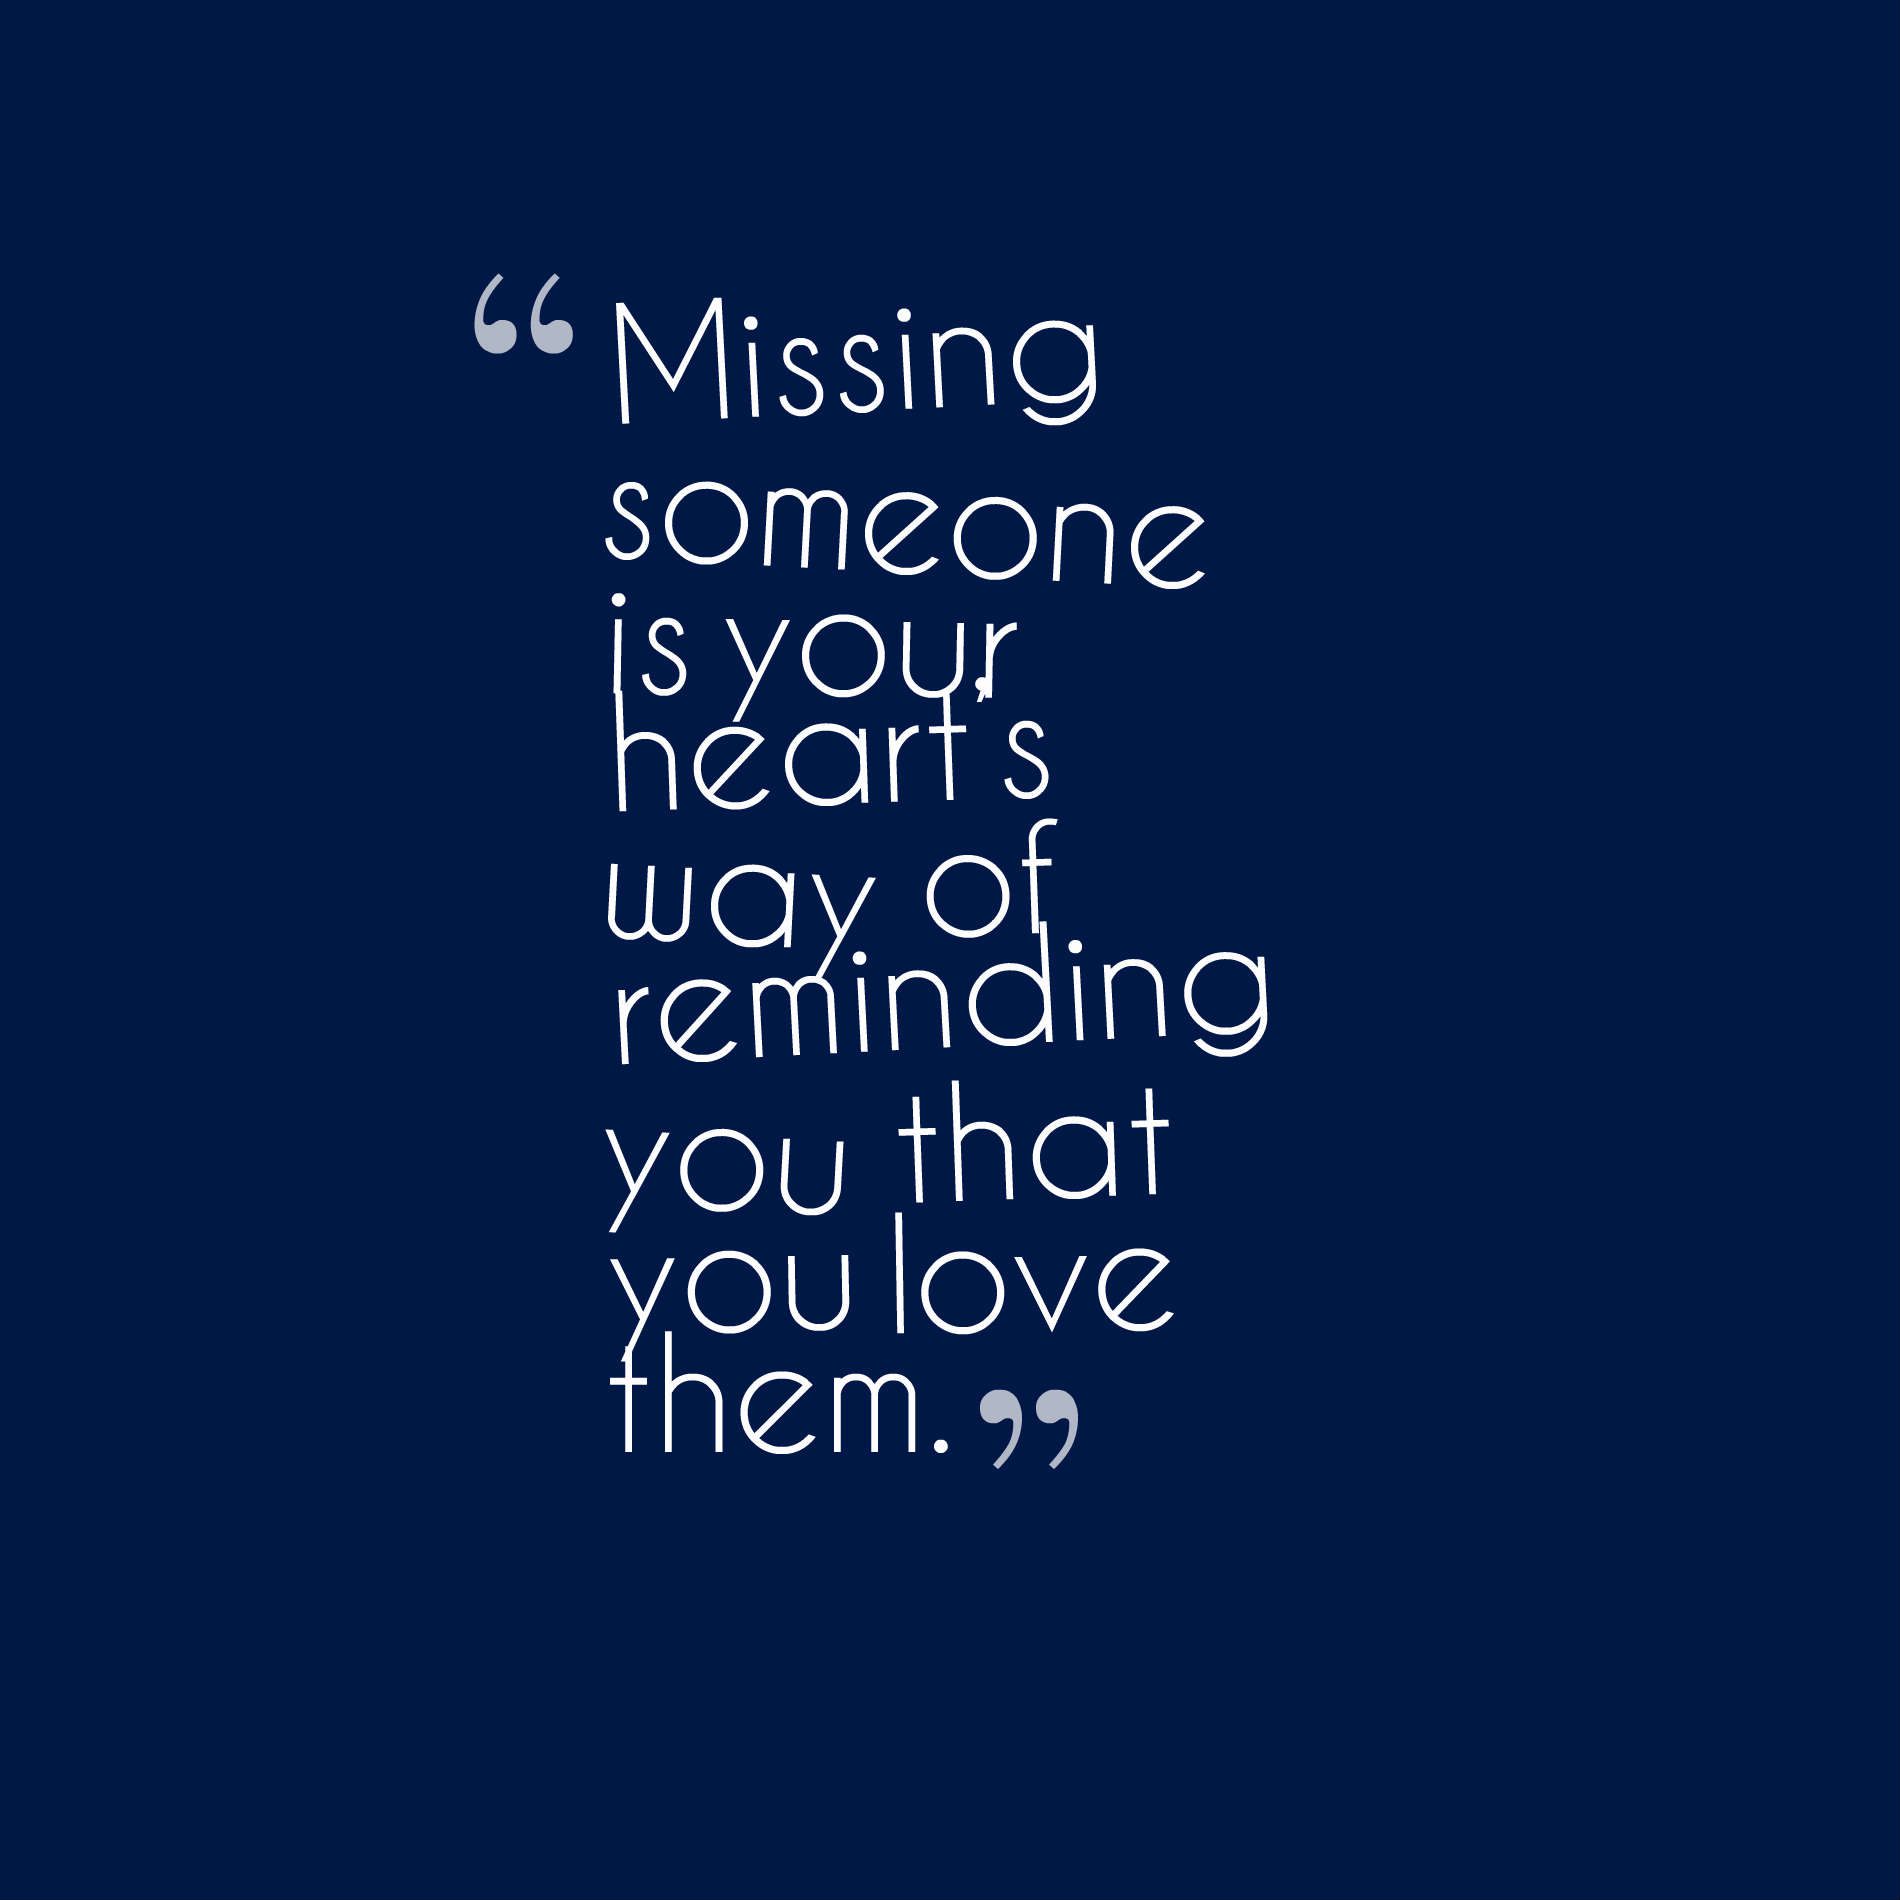 Missing someone is your heart’s way of reminding you that you love them.